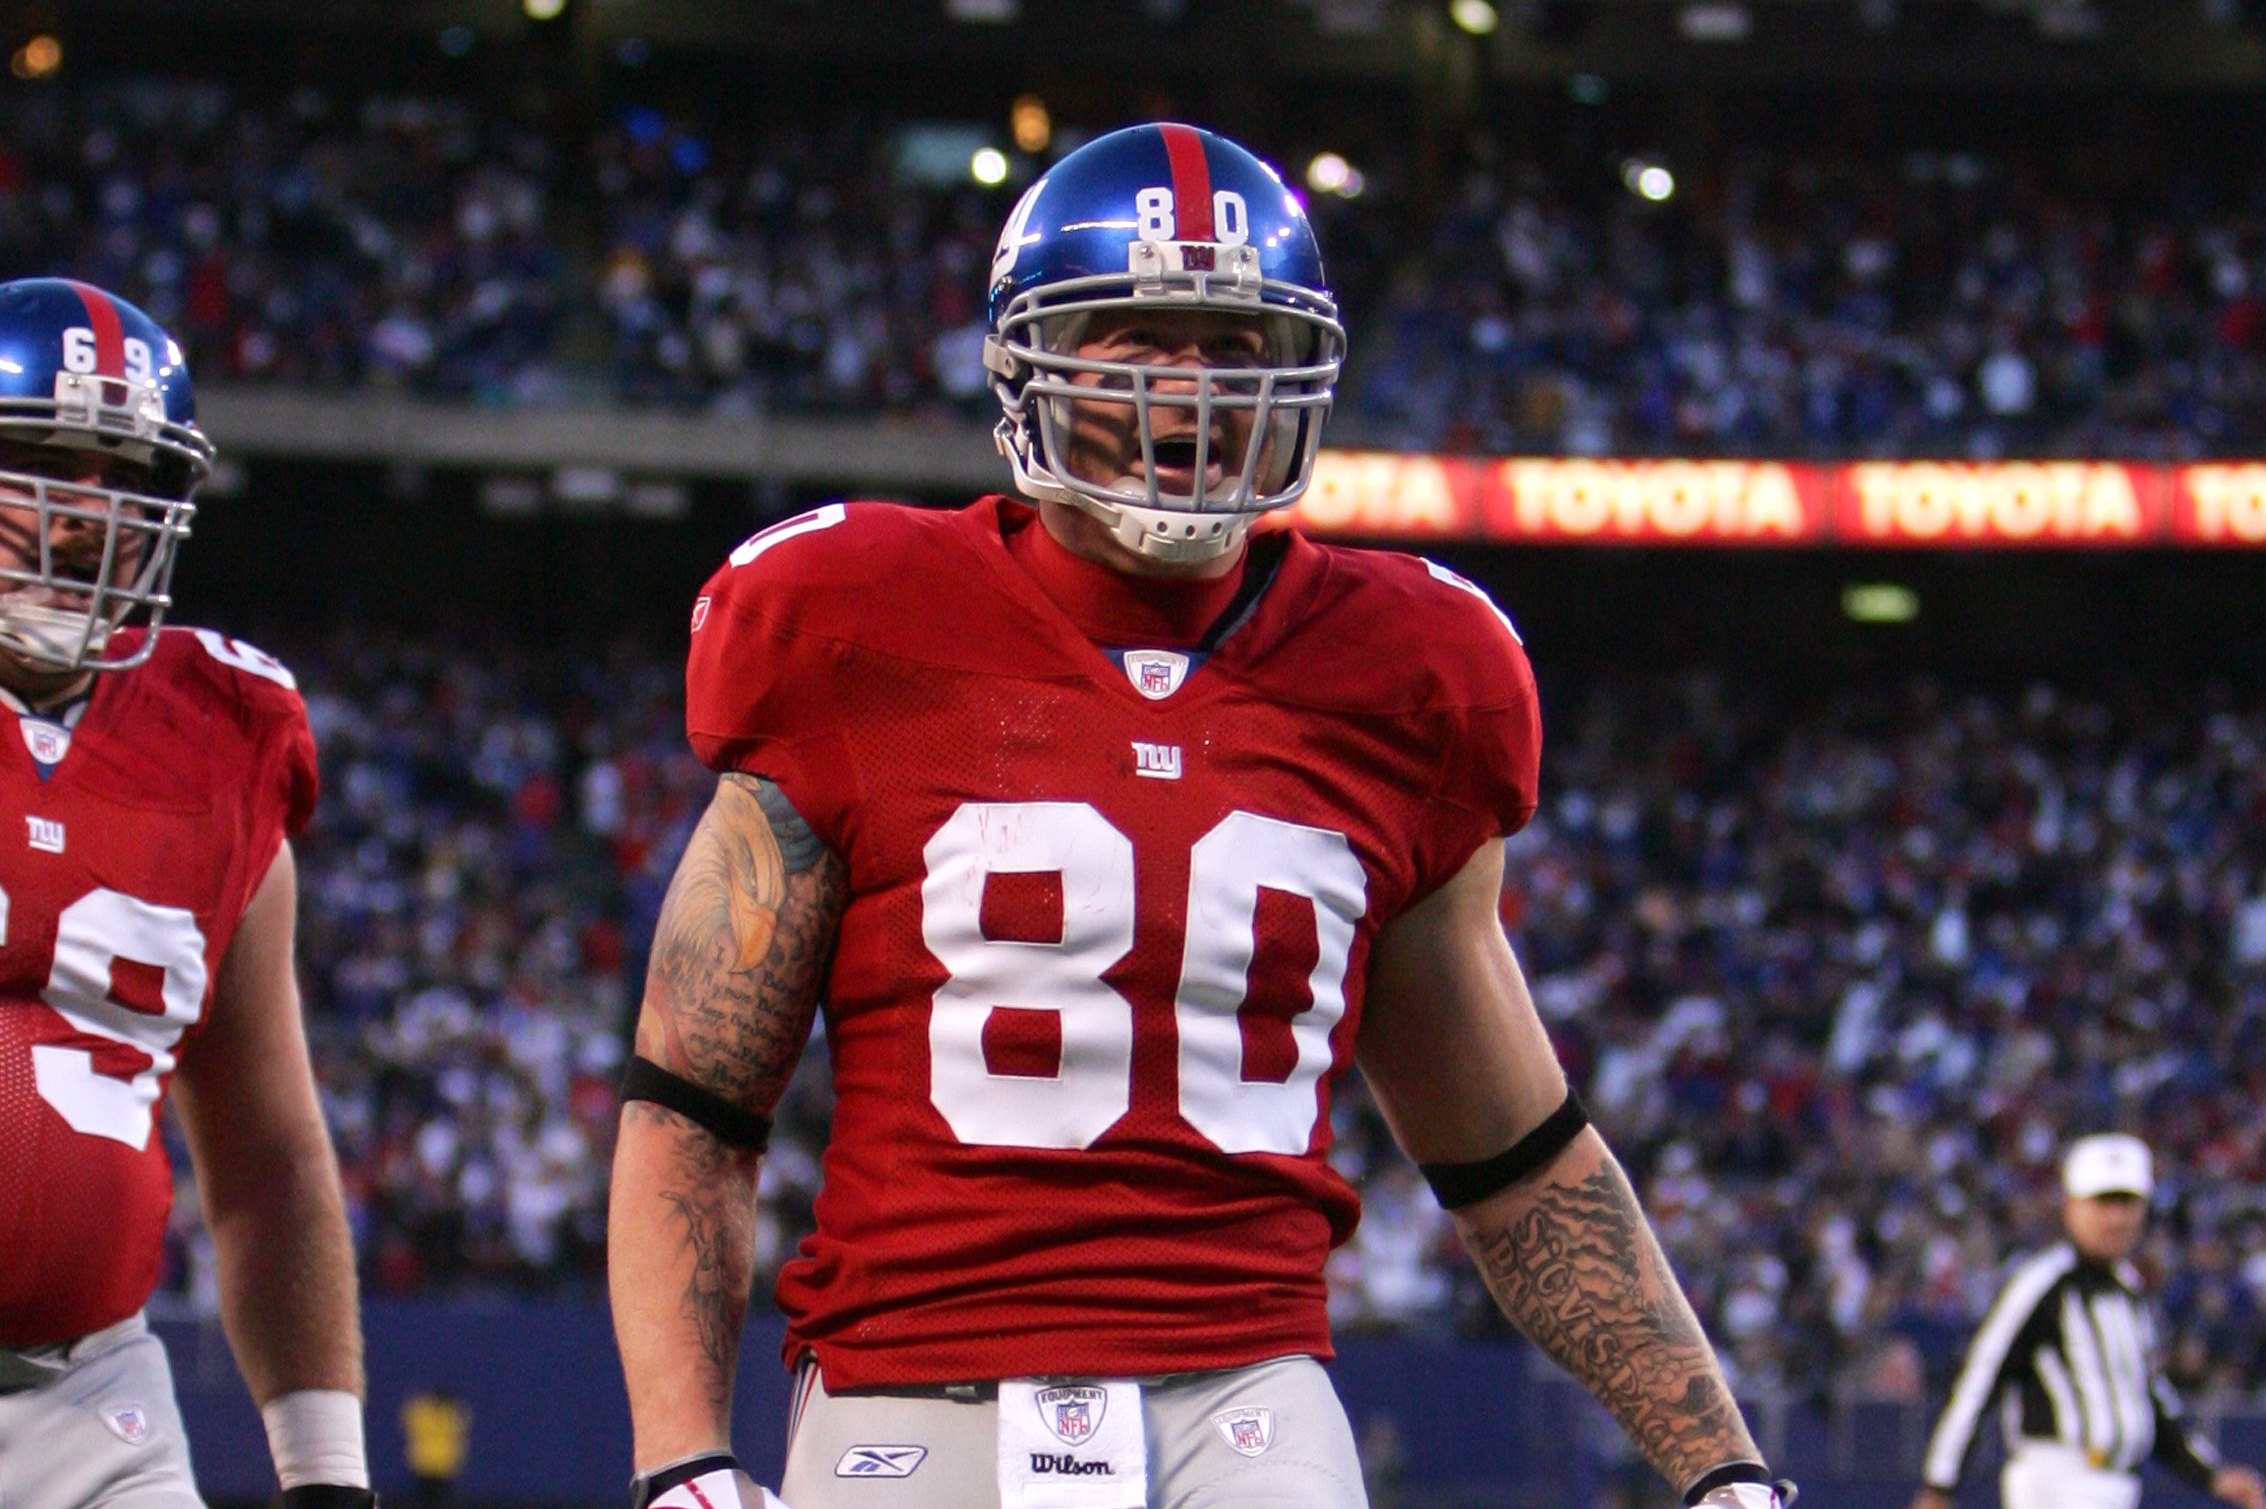 Jeremy Shockey excited to return to Giants for first time since 2008 trade  - Newsday